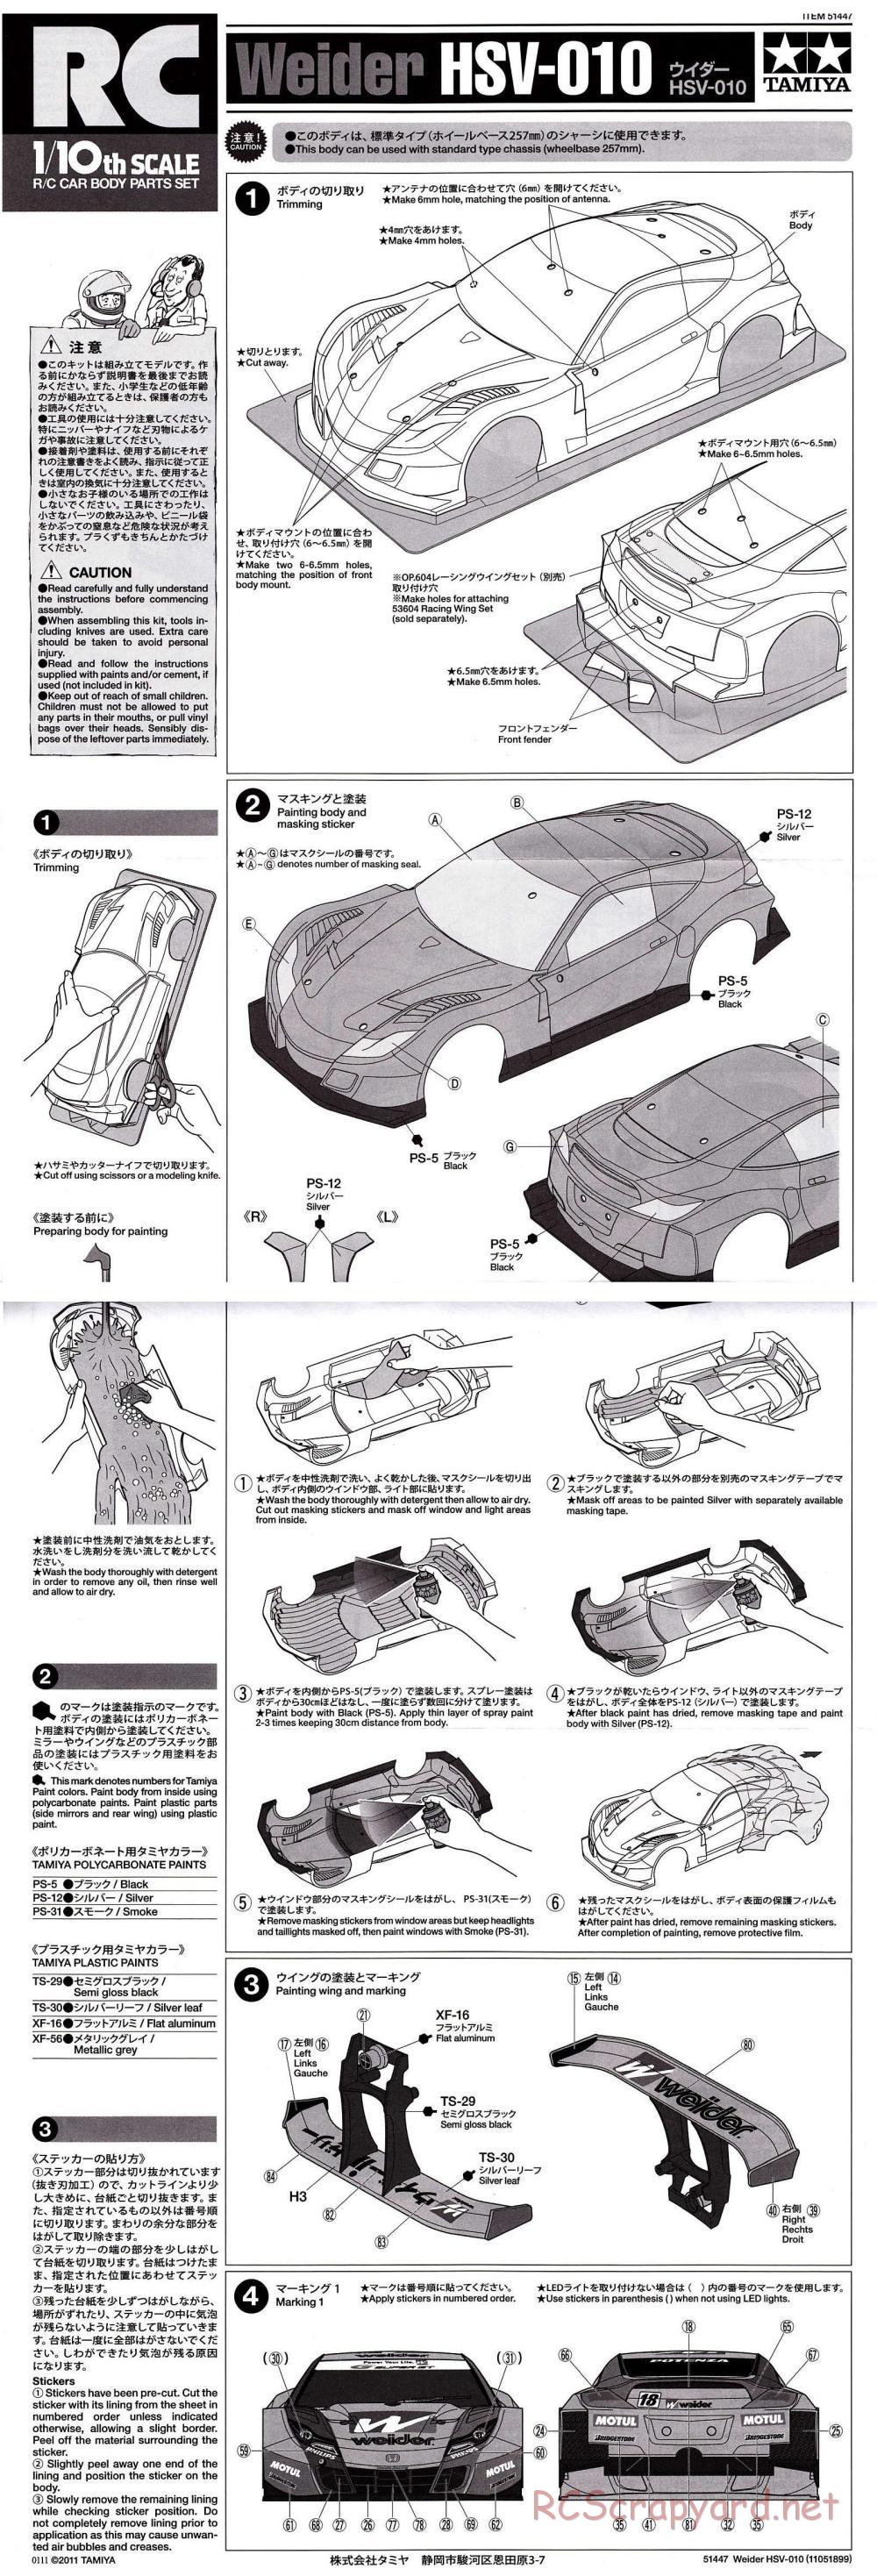 Tamiya - Weider HSV-010 - TA05 Ver.II Chassis - Body Manual - Page 1